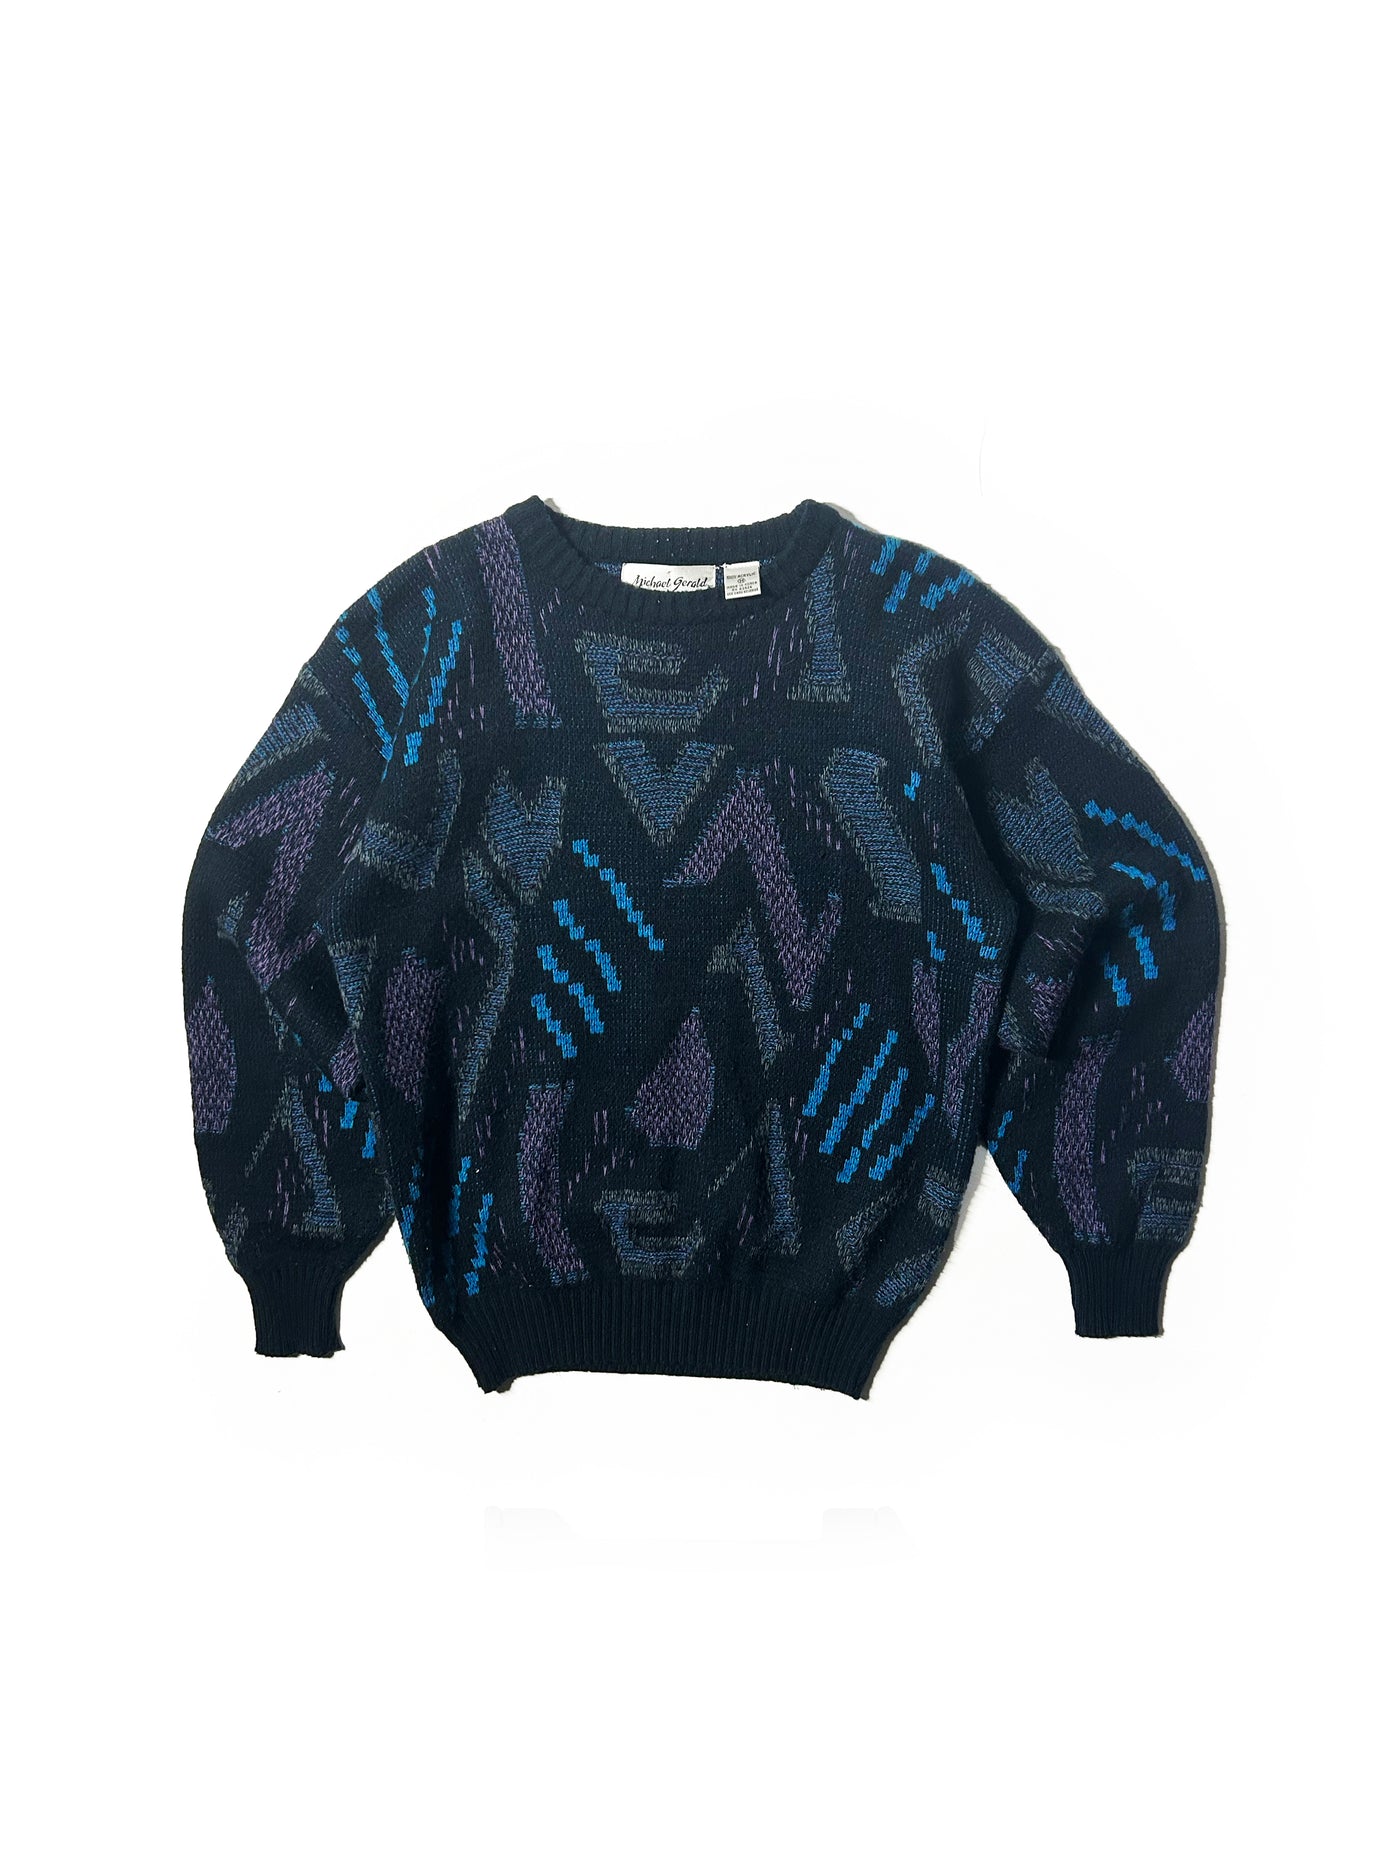 Vintage 90s Michael Gerald Patterned Acrylic Sweater